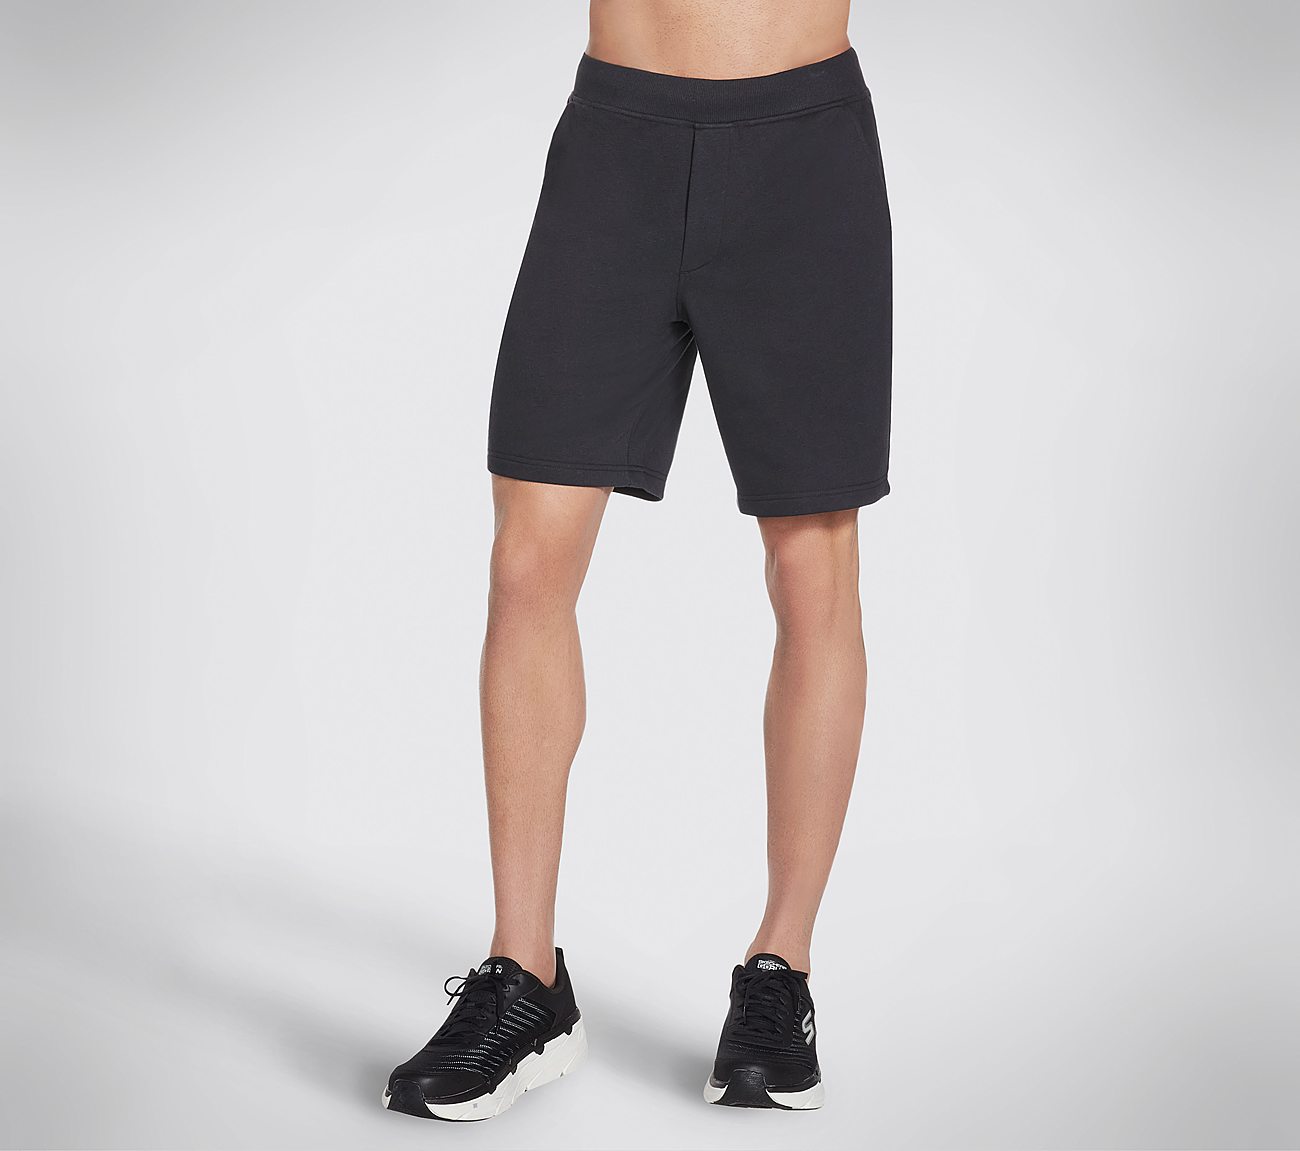 EXPLORER 9IN SHORT, BBBBLACK Apparel Lateral View